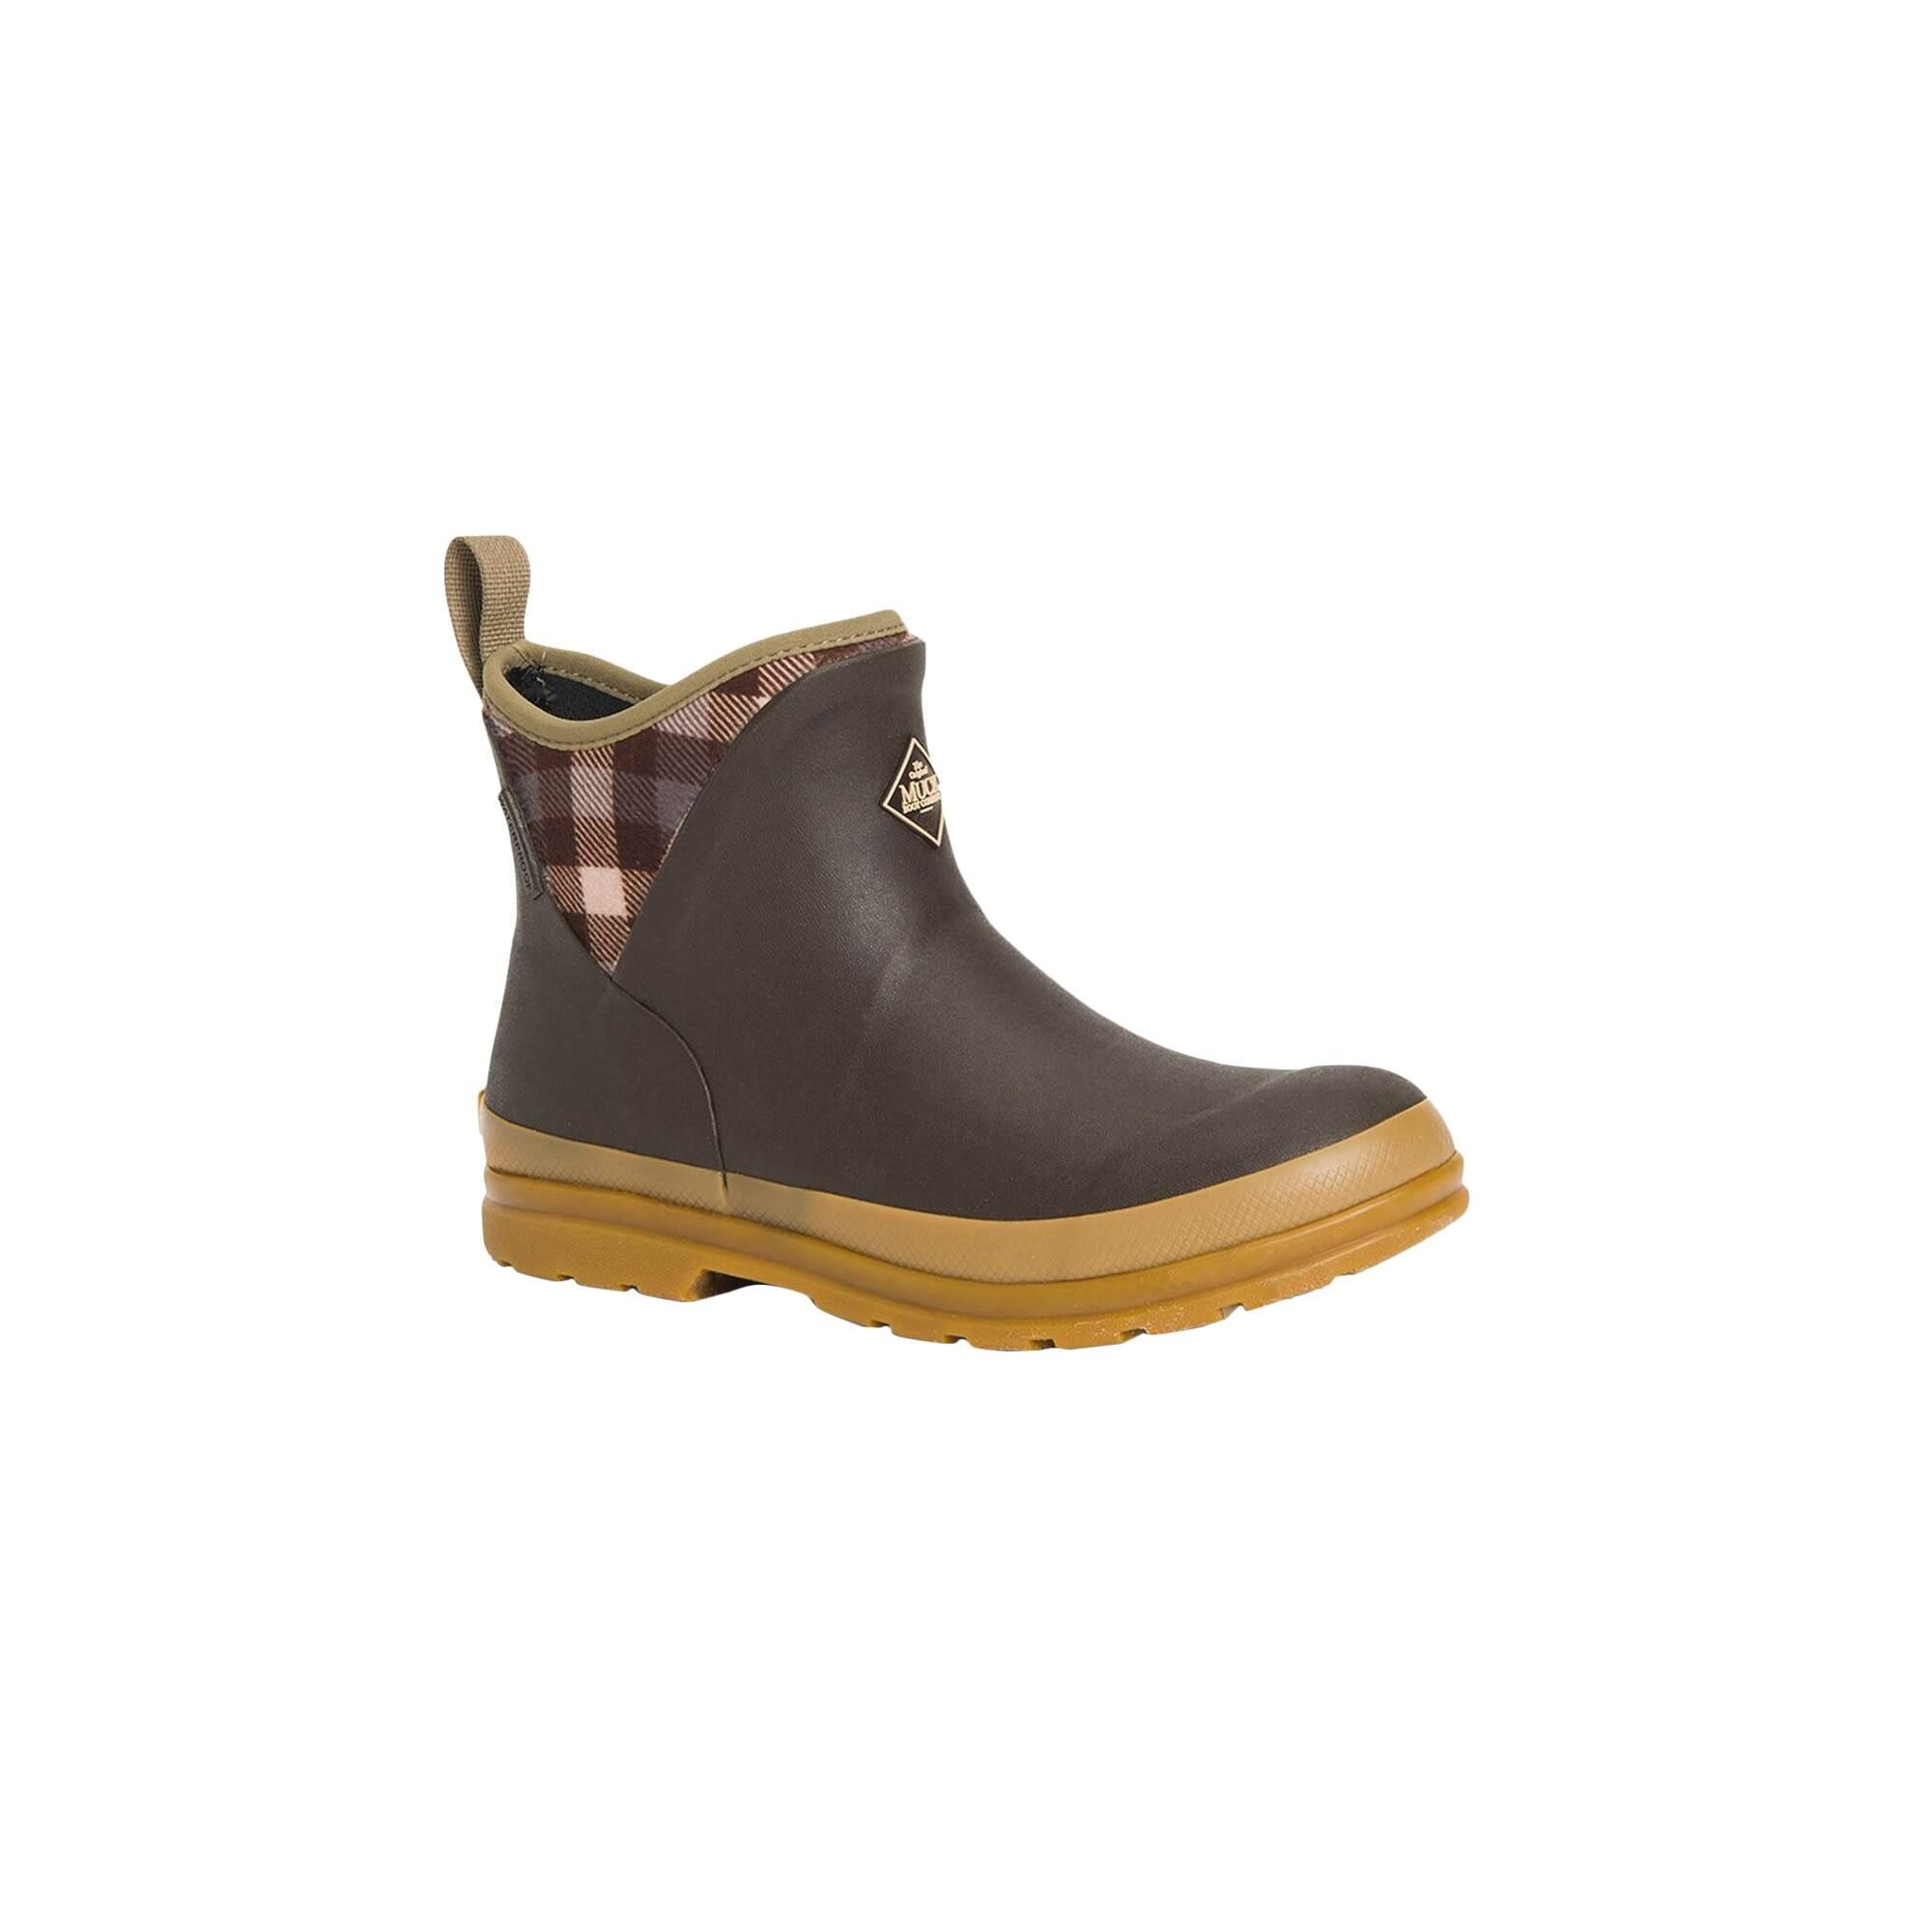 MUCK BOOTS Womens/Ladies Wellington Boots (Brown)